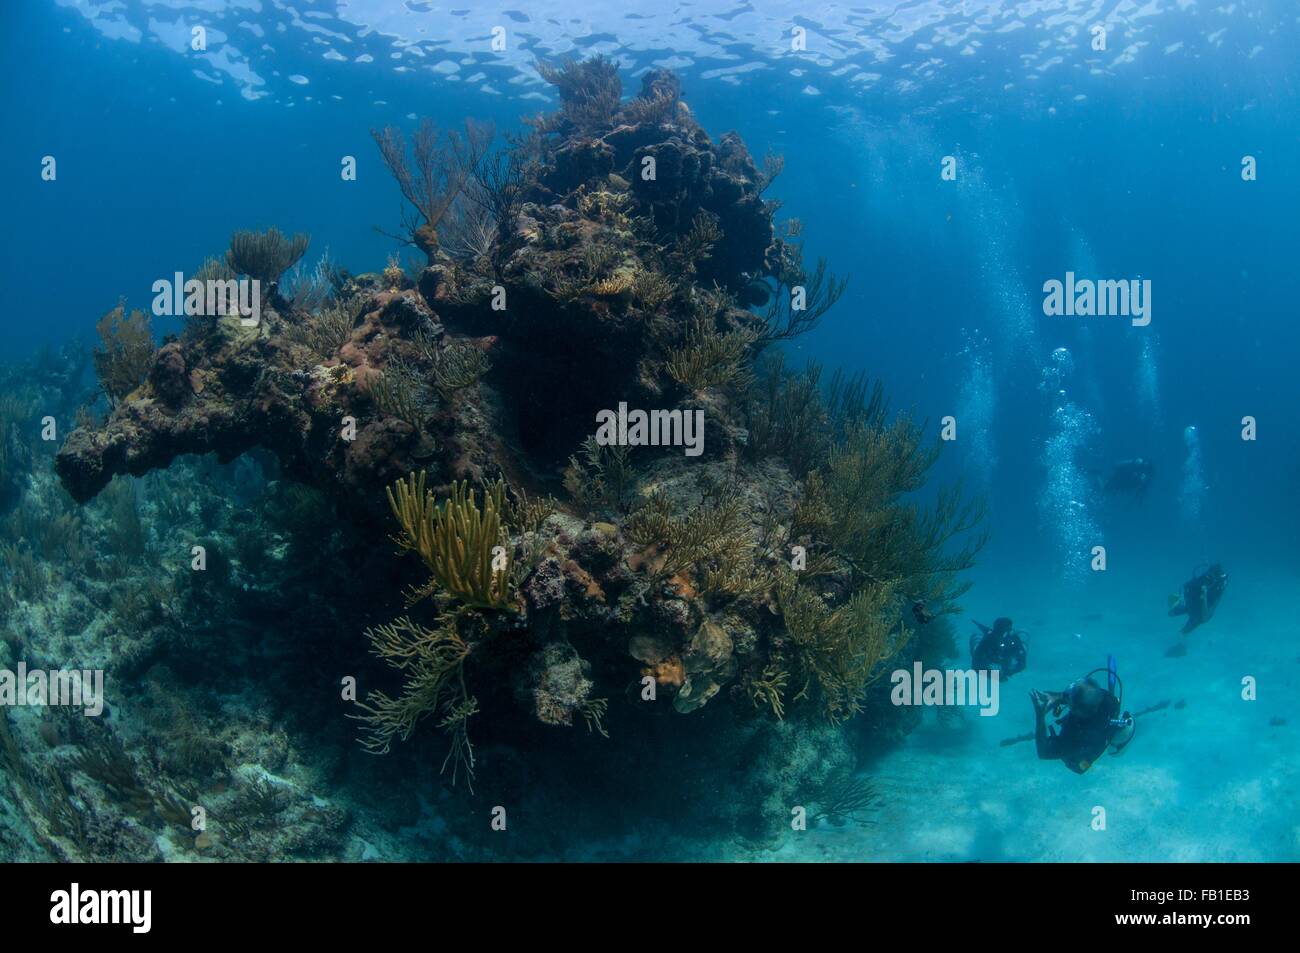 Small group of scuba divers swimming next to giant coral head, Xcalak, Quintana Roo, Mexico Stock Photo